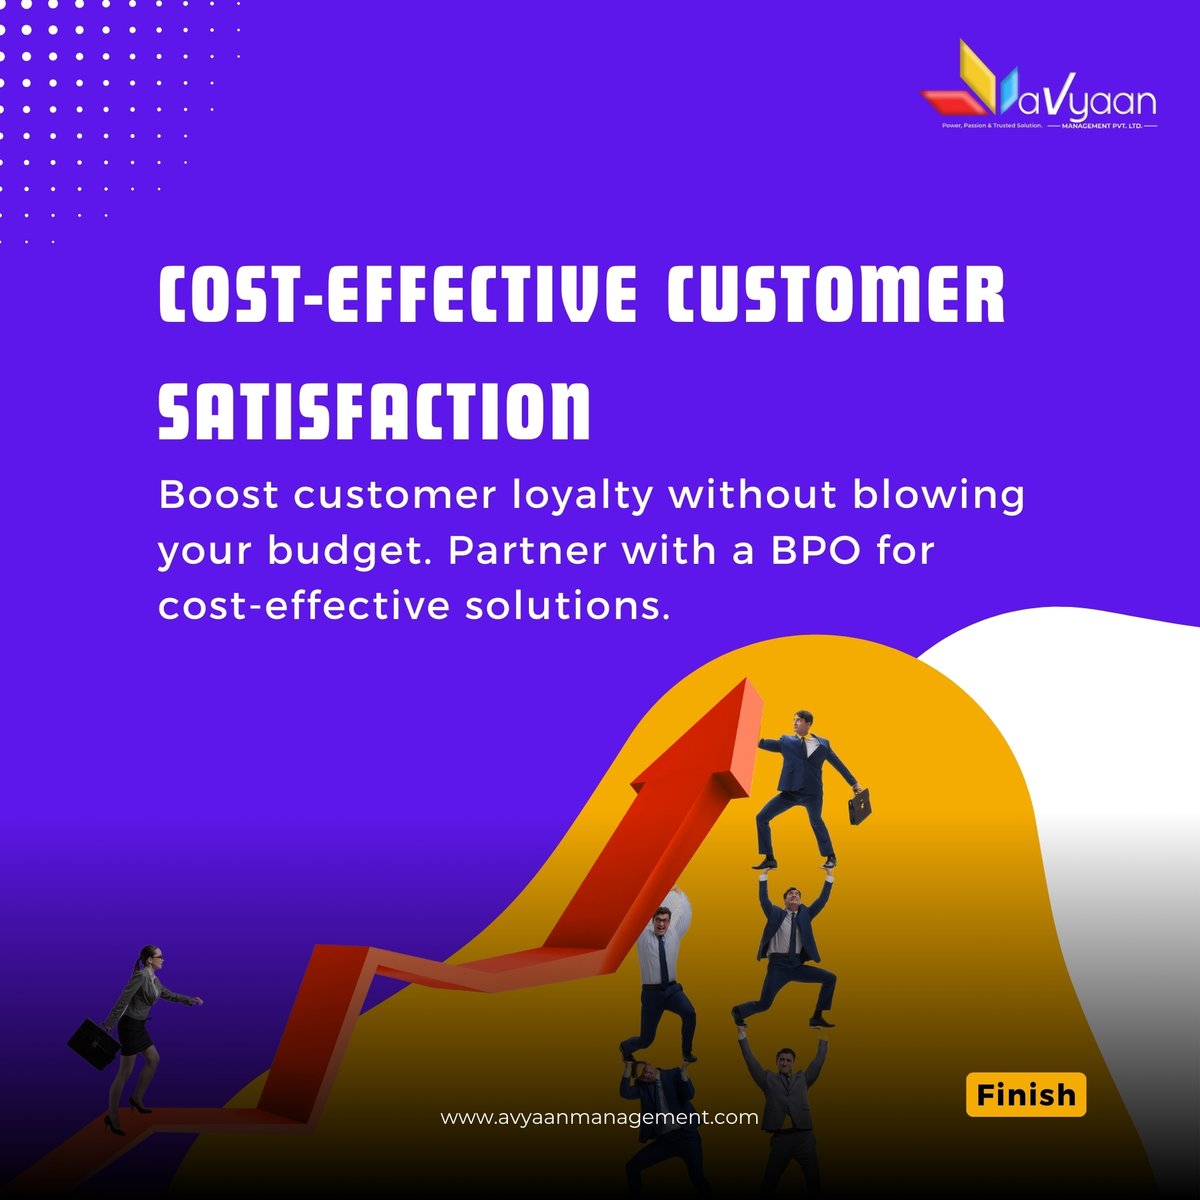 Provide exceptional customer support without breaking the bank! BPO partners offer multilingual support solutions 24/7, ensuring customer satisfaction and loyalty.

#customersupport #bpo #multilingualsupport #247support #customersatisfaction #loyalty #costeffective #affordable